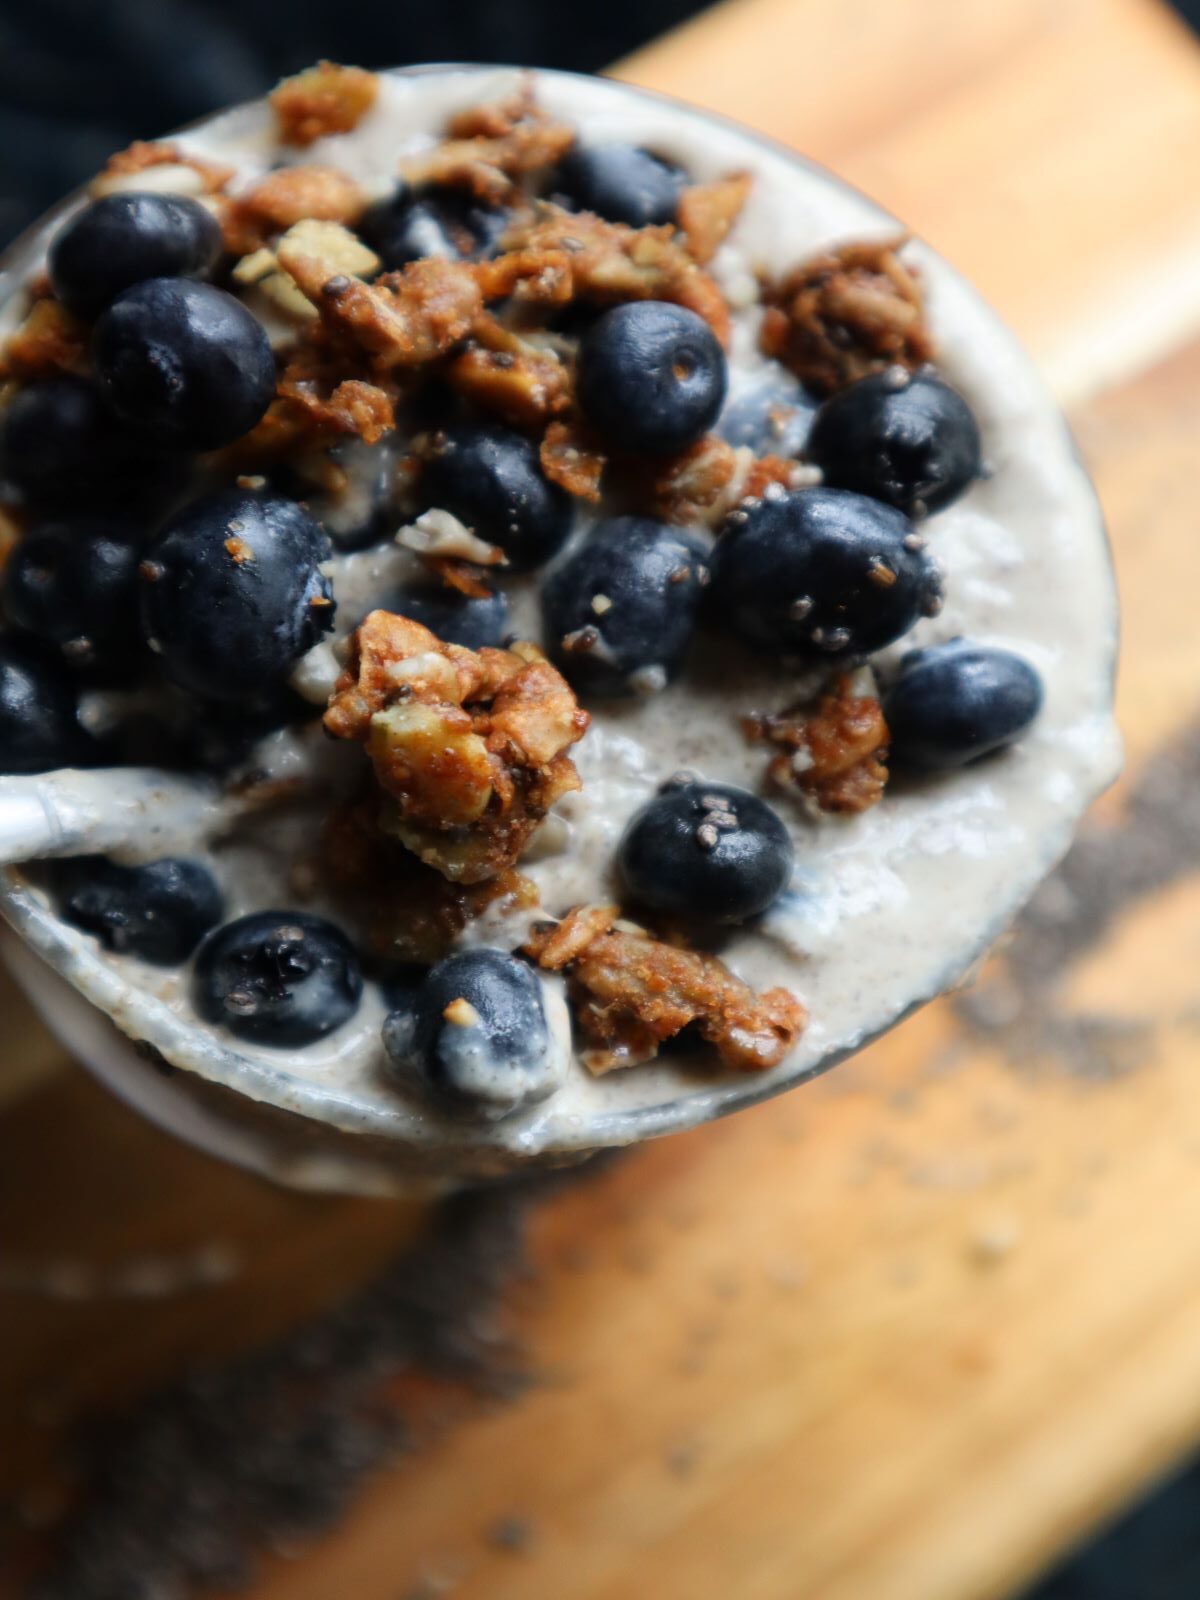 Cup of Chia Seed pudding with spoon in it topped with blueberries and granola on a light brown board background that has chia seeds spread on it